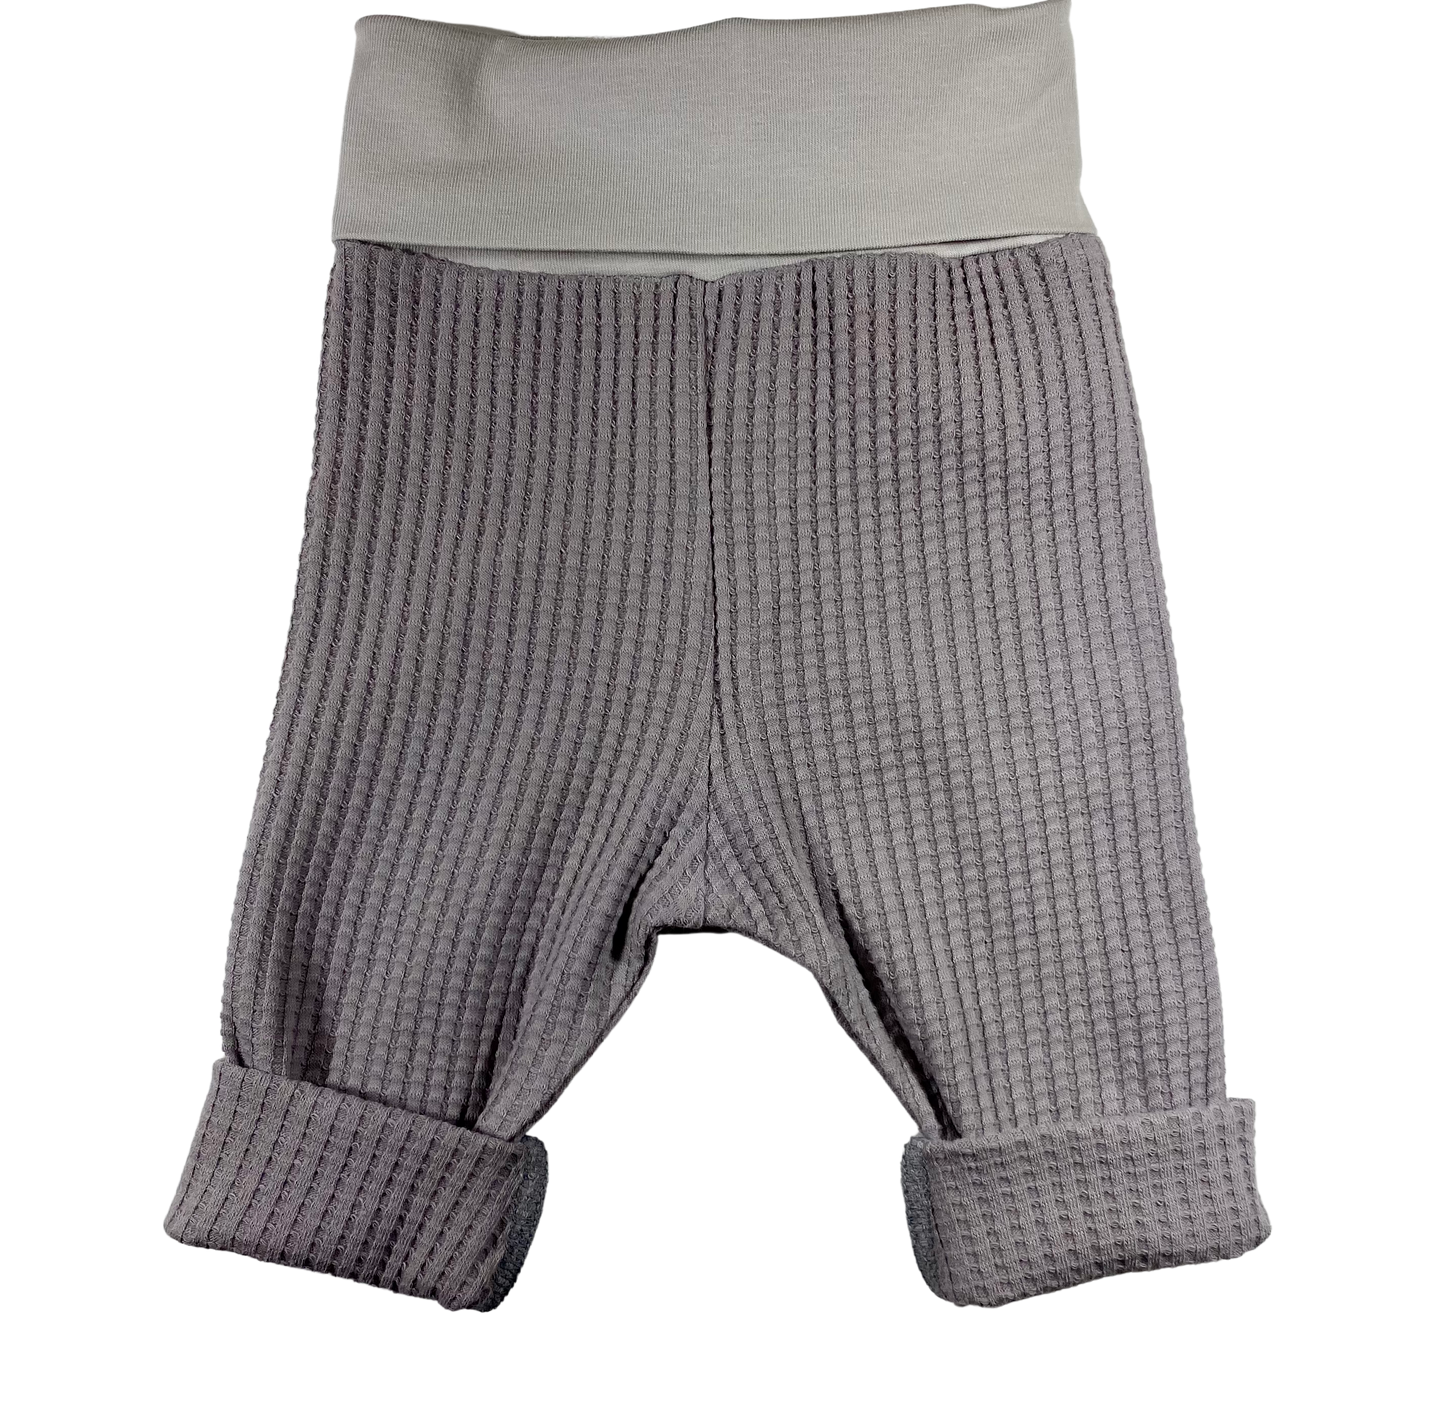 Toddler Size GREY Neutral Waffle Knit Grow Along® Infant Lounge Pants